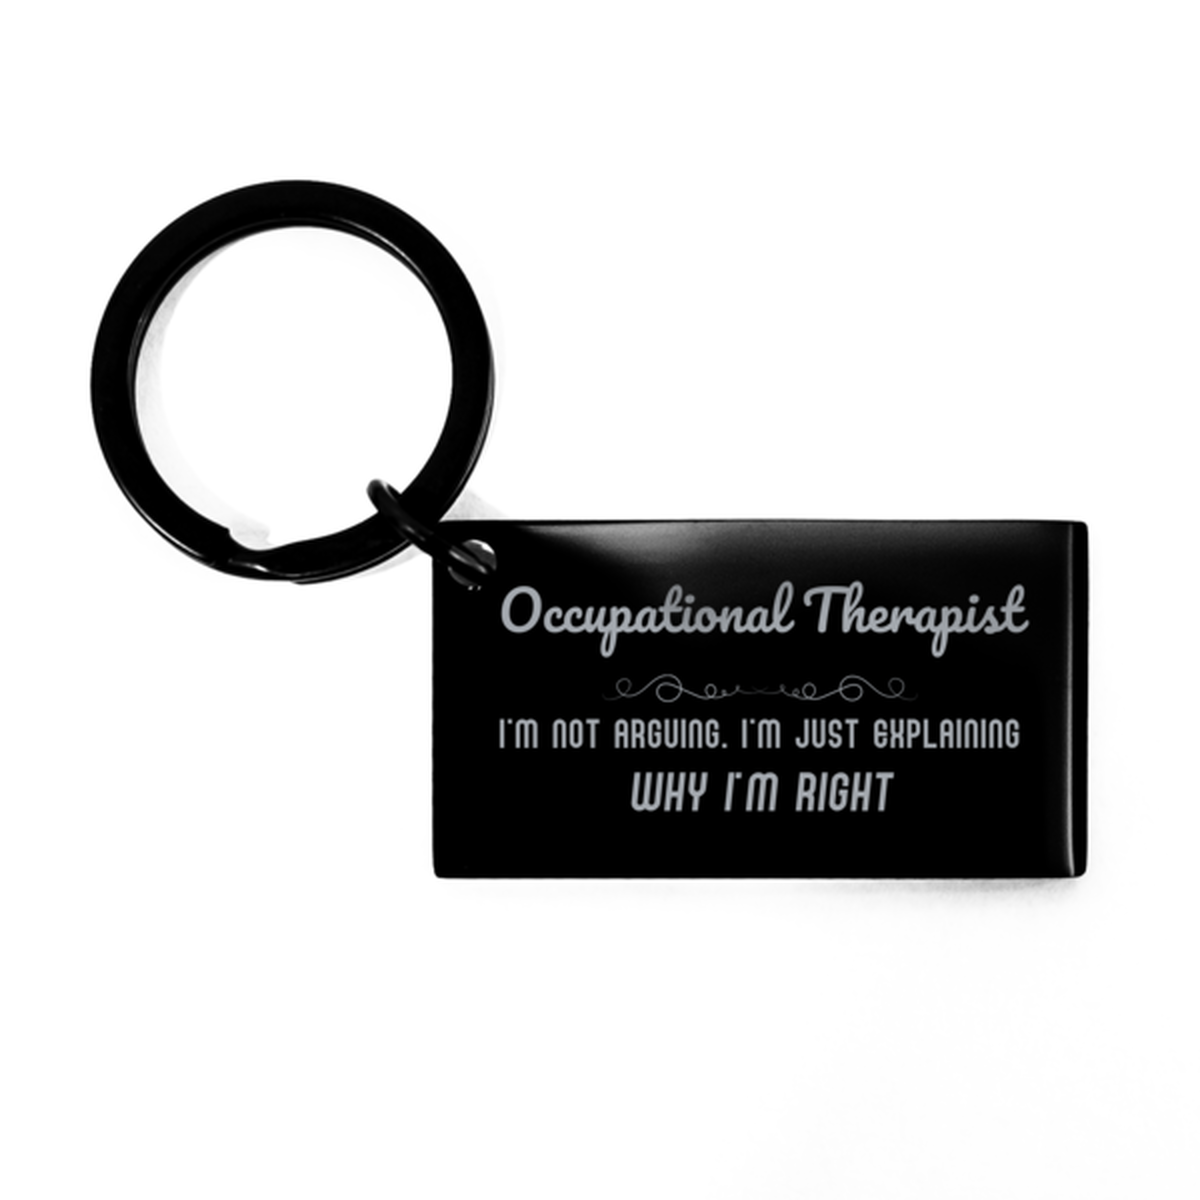 Occupational Therapist I'm not Arguing. I'm Just Explaining Why I'm RIGHT Keychain, Funny Saying Quote Occupational Therapist Gifts For Occupational Therapist Graduation Birthday Christmas Gifts for Men Women Coworker